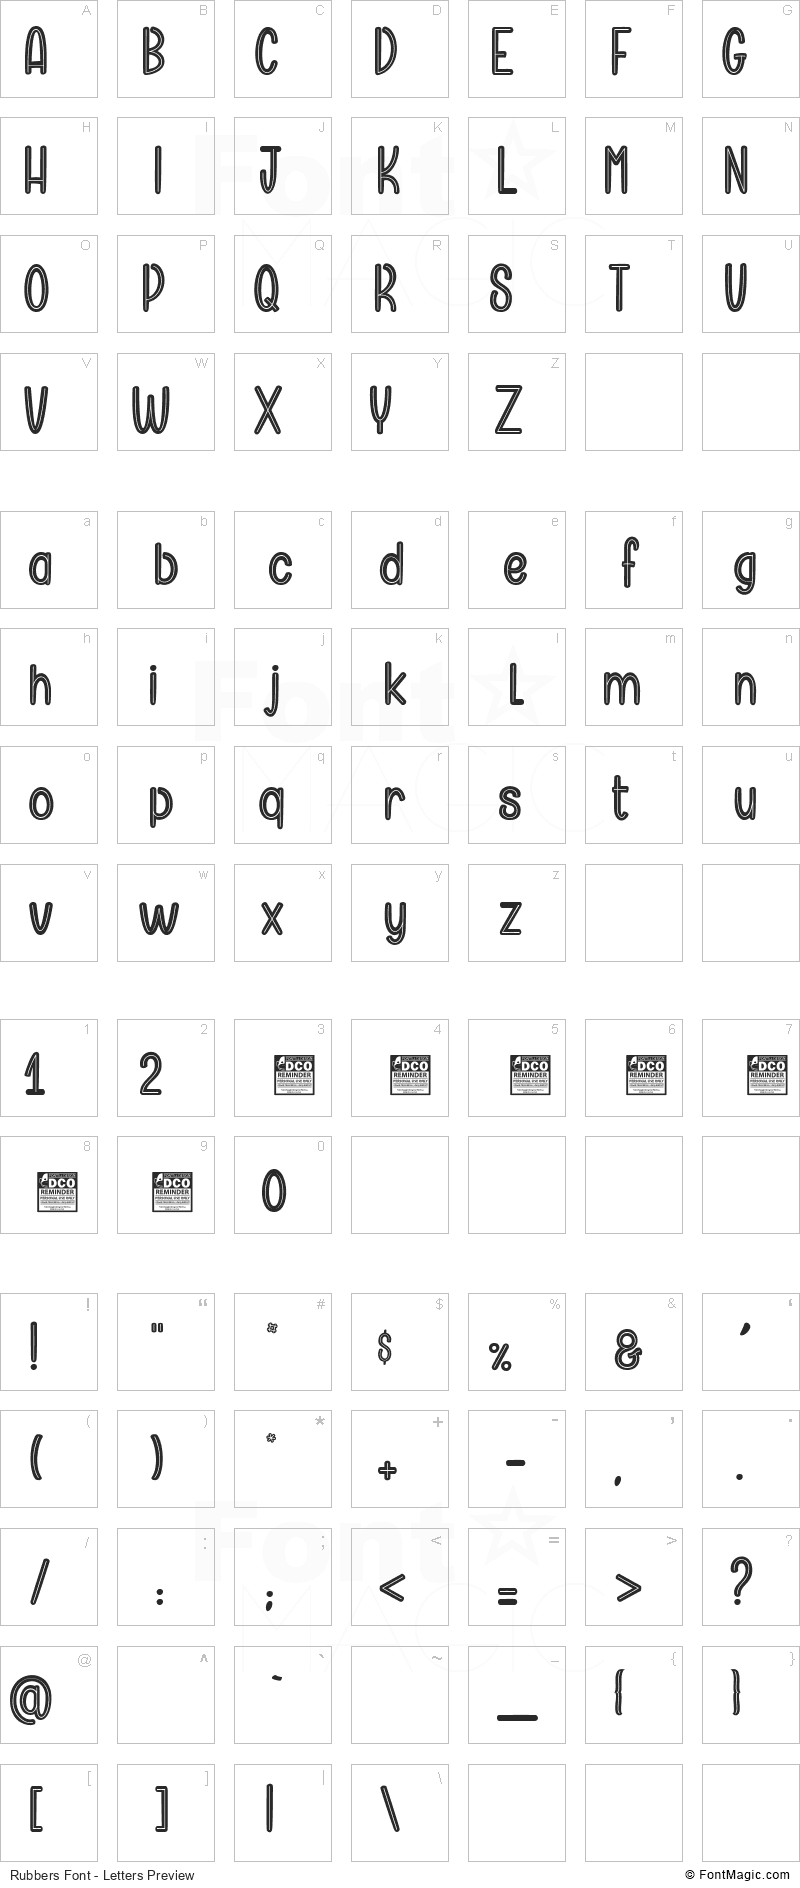 Rubbers Font - All Latters Preview Chart